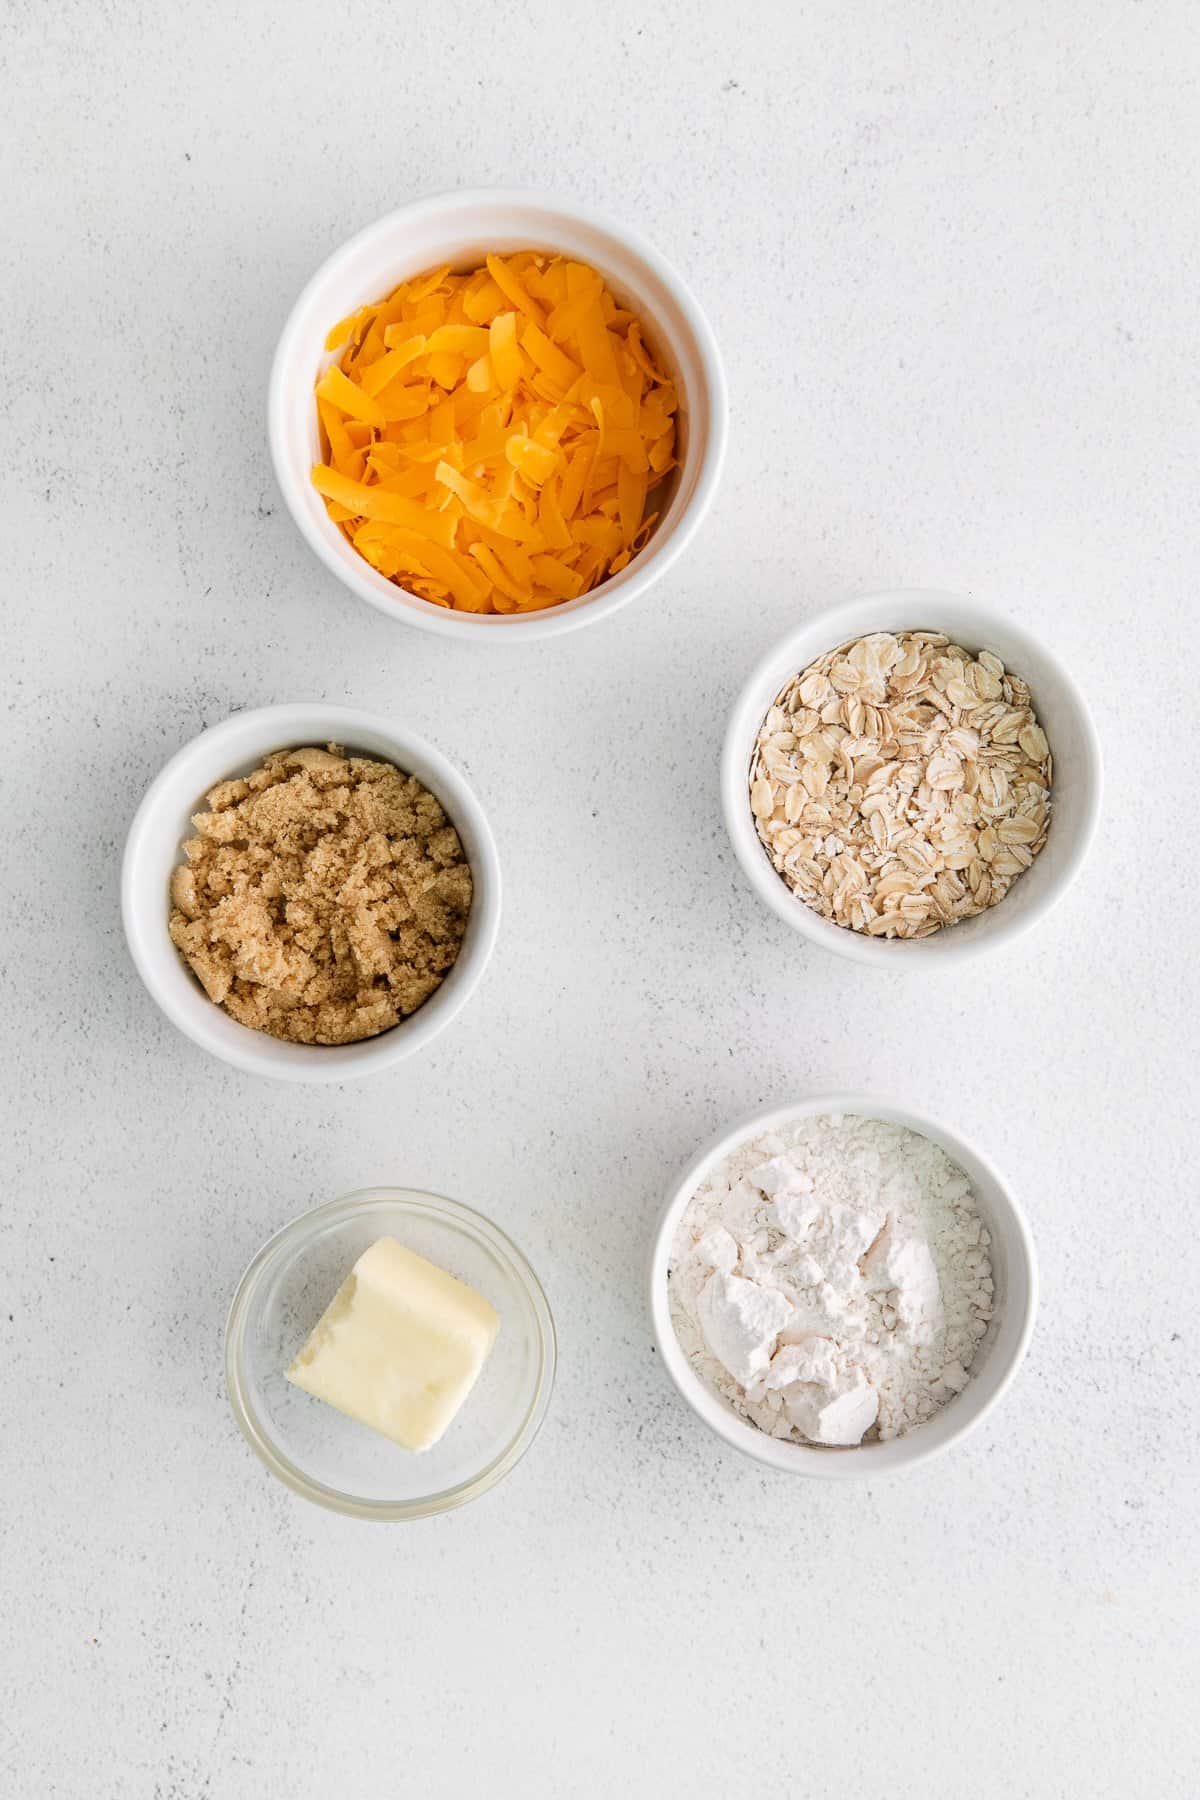 Ingredients for crumble topping in bowls.